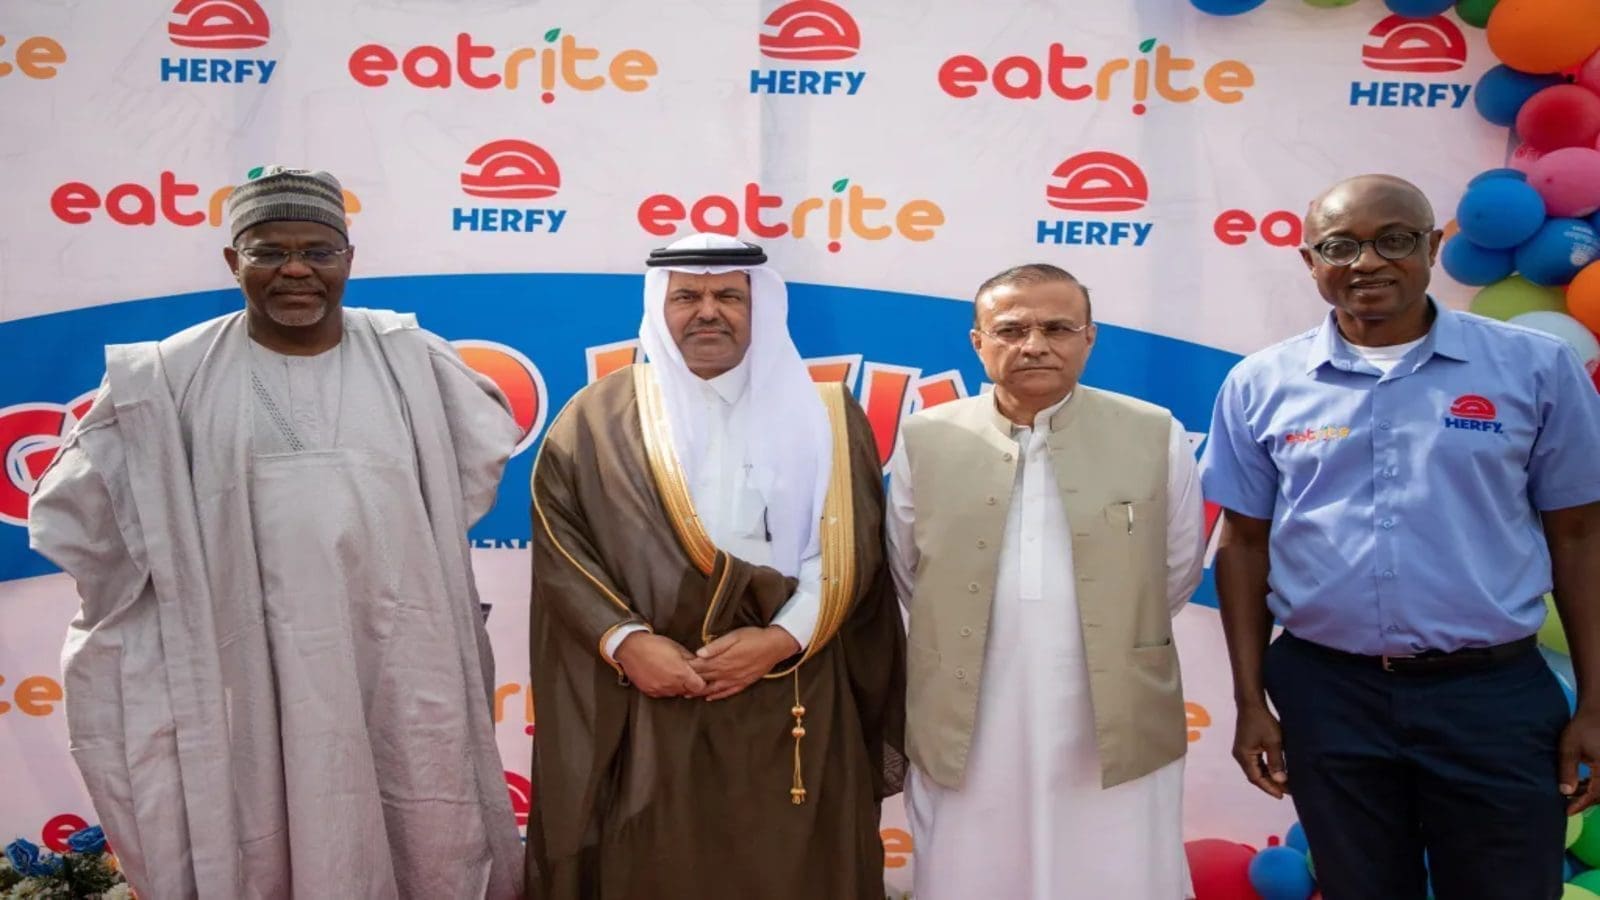 Saudi food service company Herfy expands into Africa with launch of two outlets in Nigeria